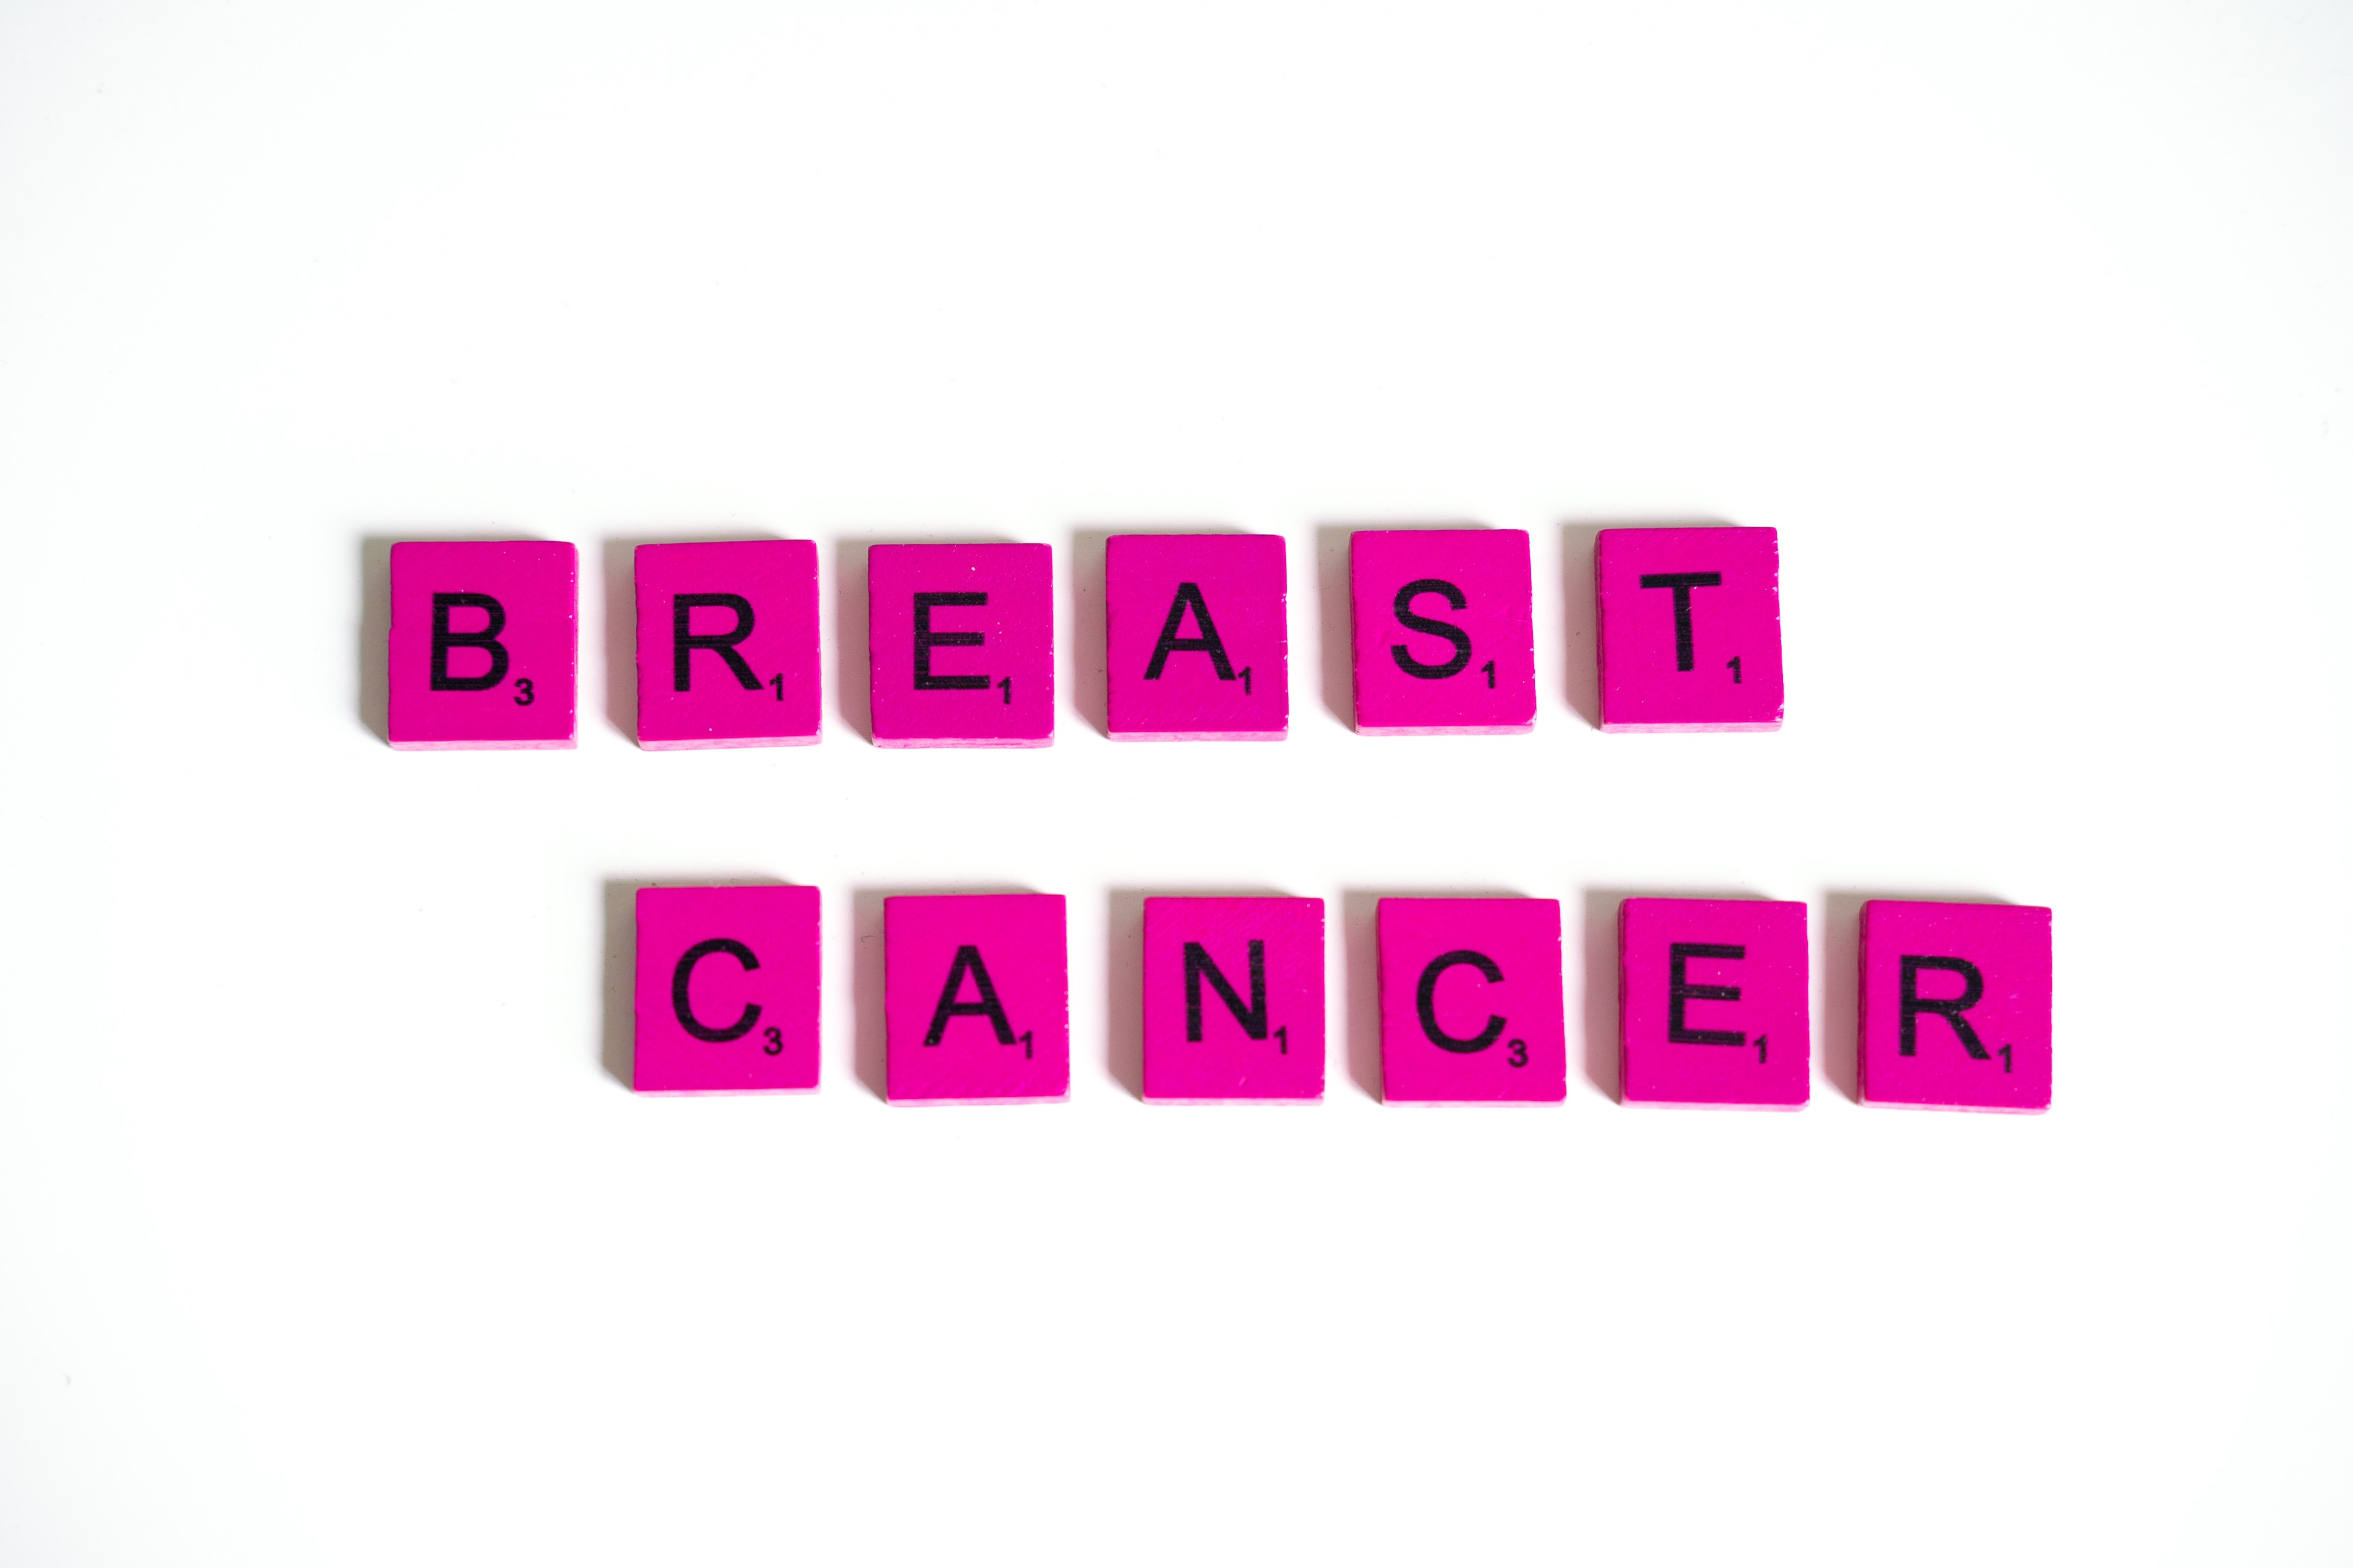 early detection and diagnosis of breast cancer